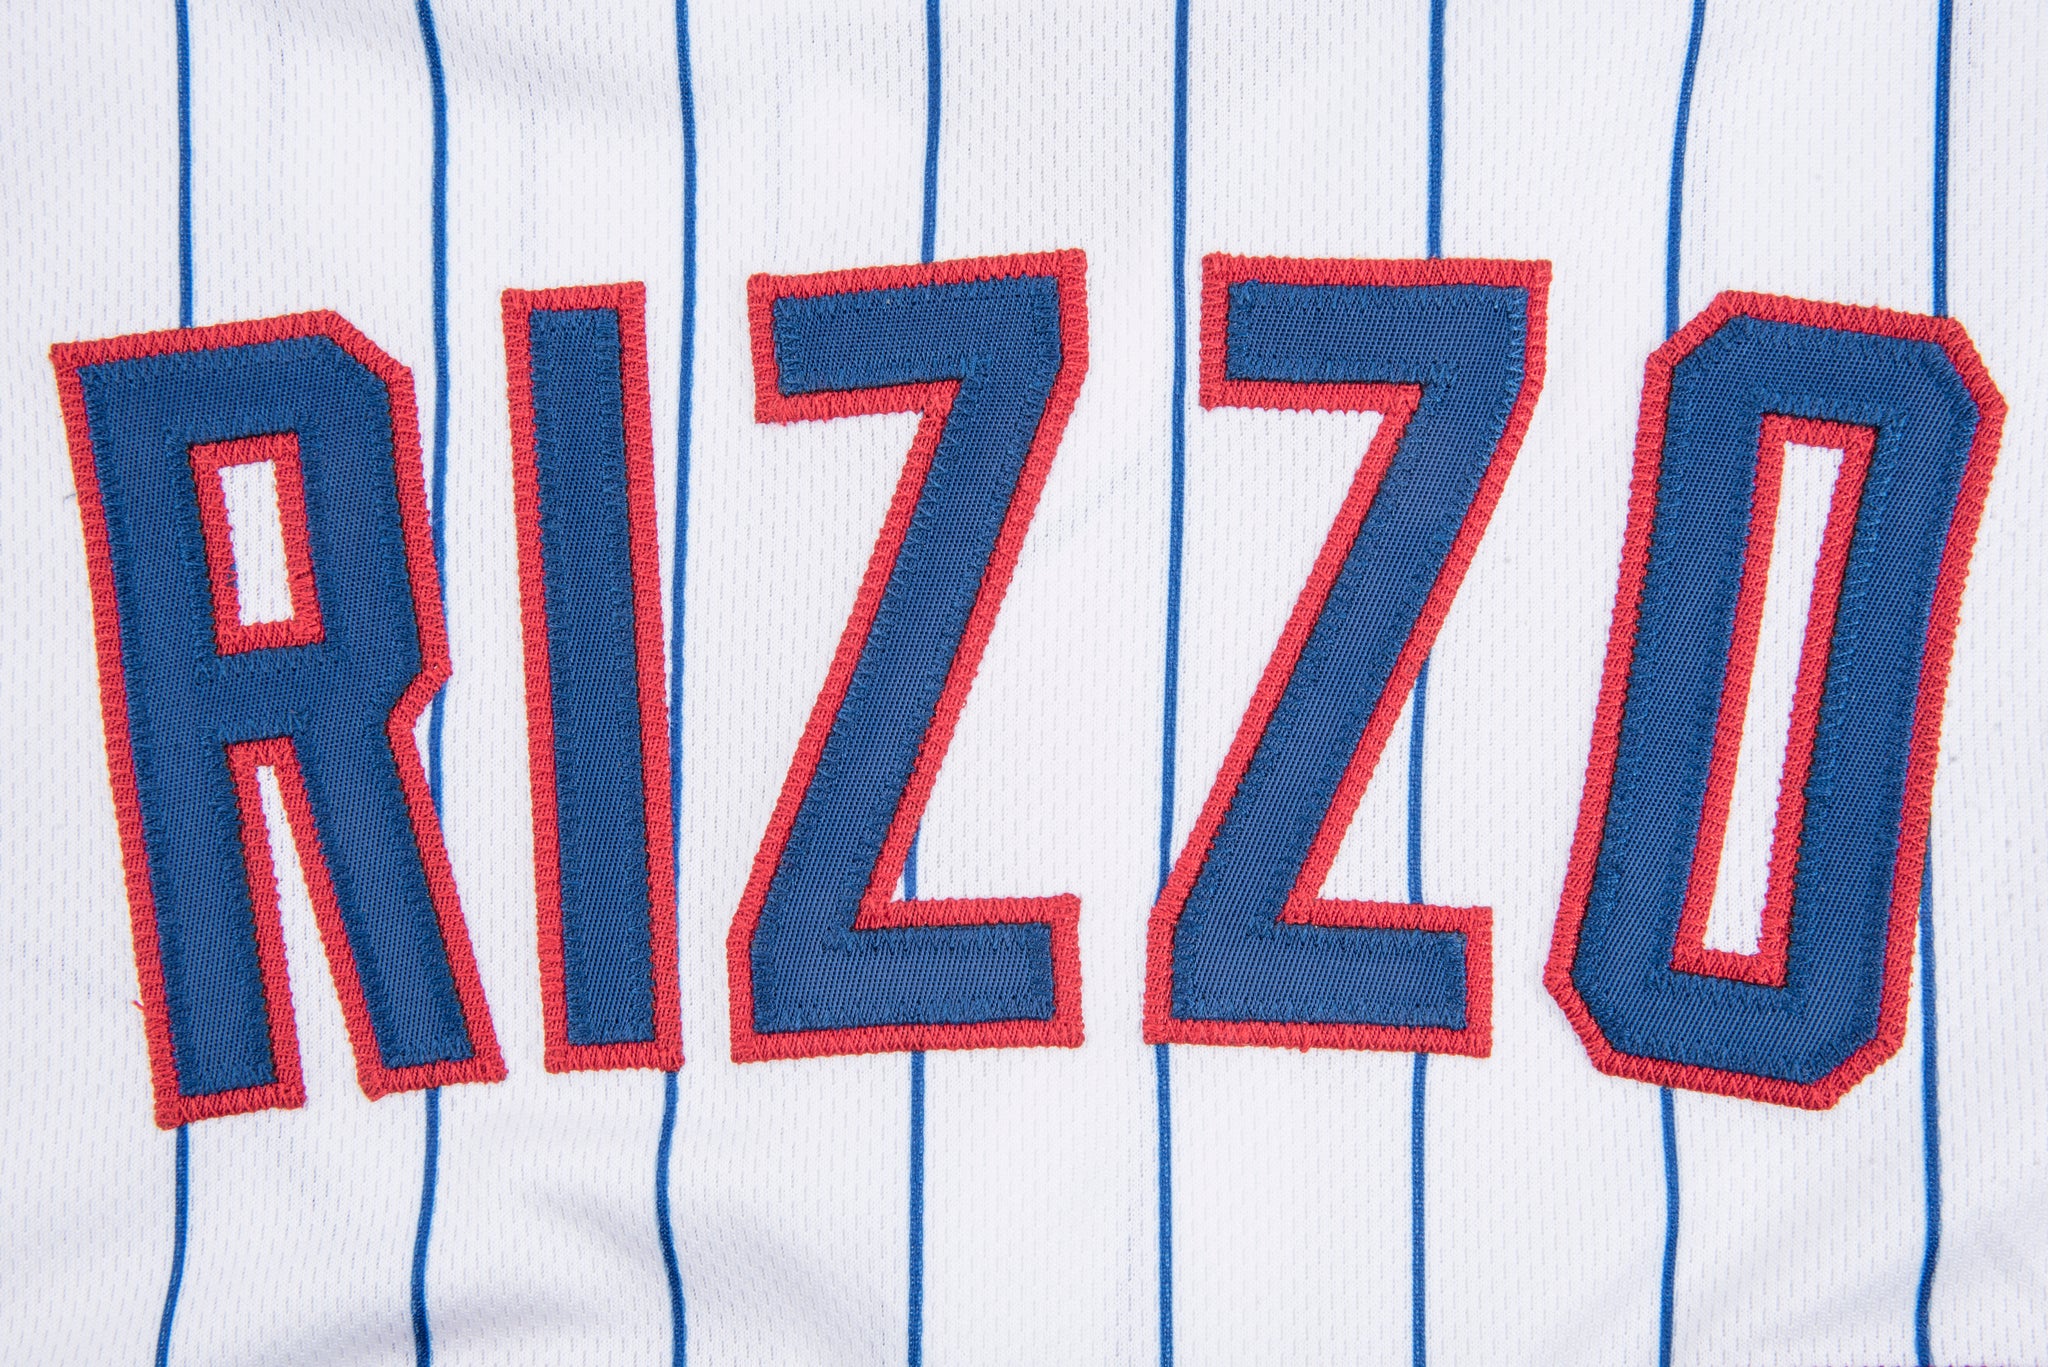 2013 Anthony Rizzo Game Used & Signed Chicago Cubs Home Jersey Used on  9/25/13